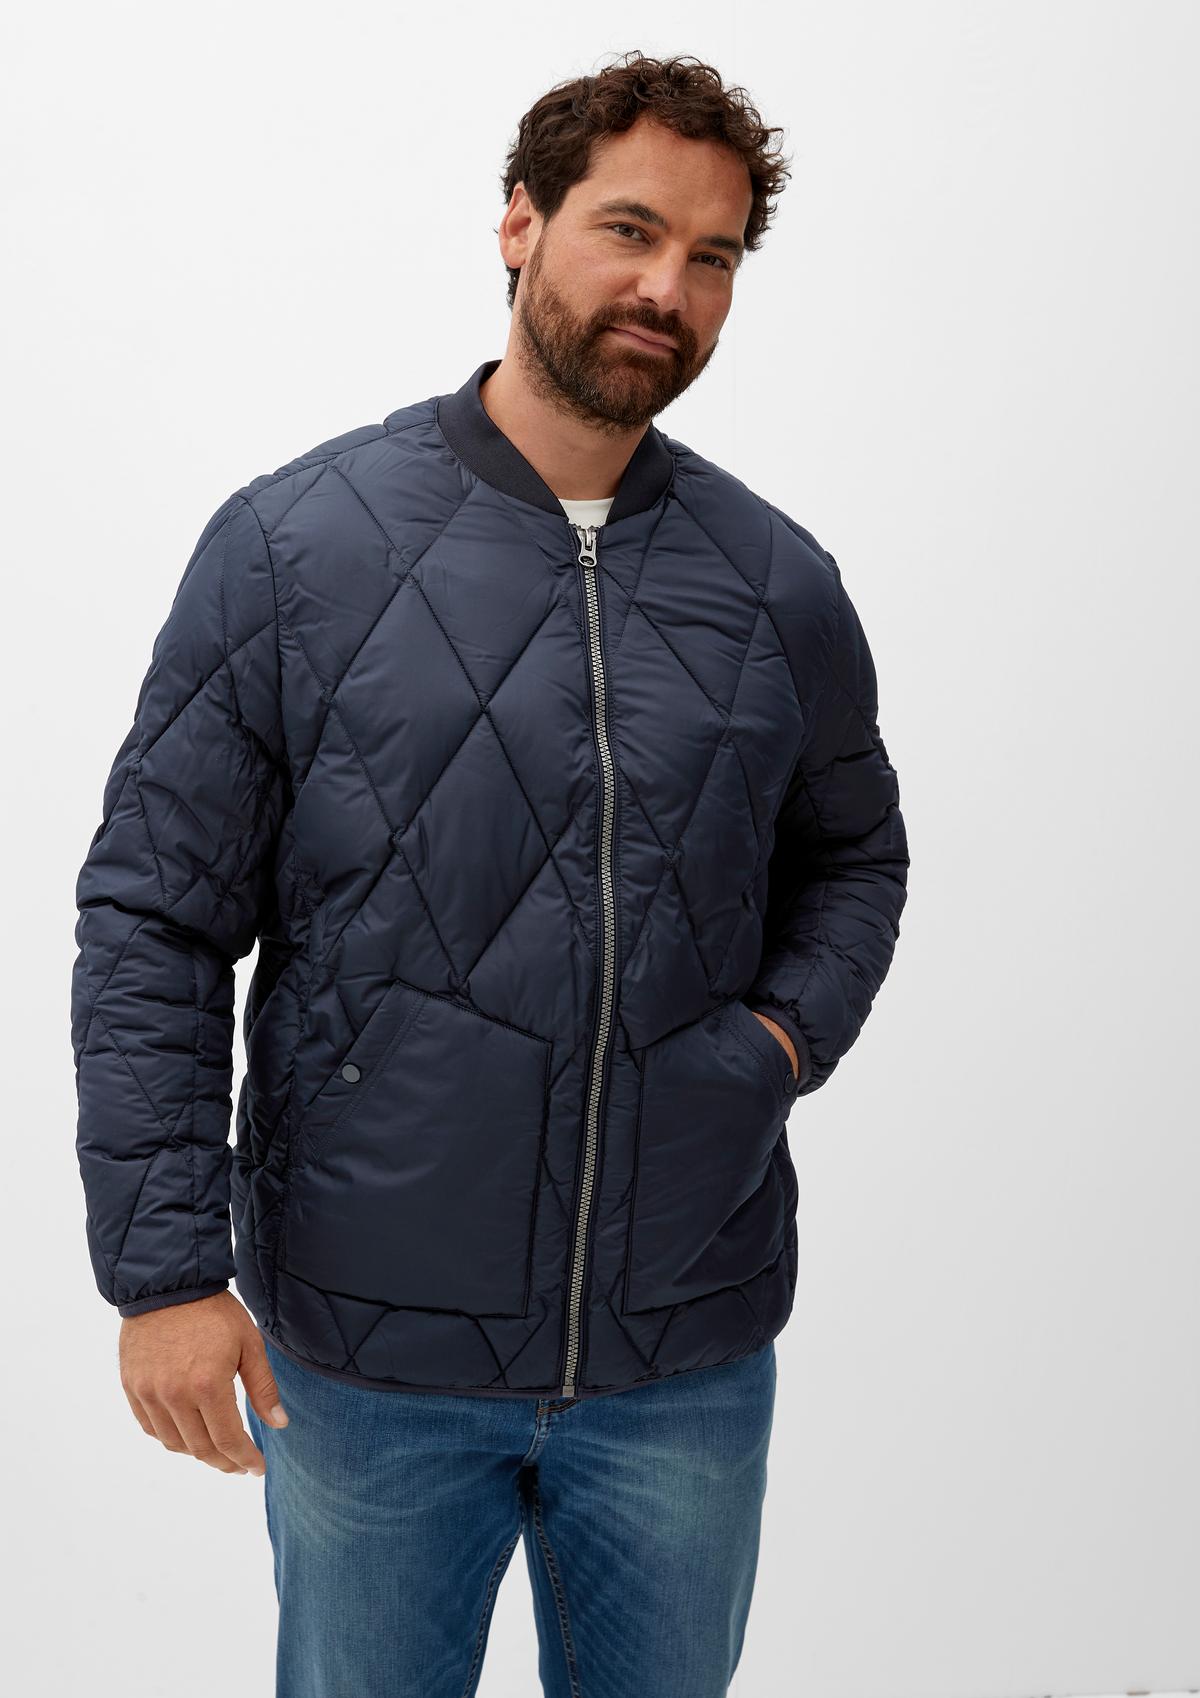 s.Oliver Bomber jacket with stitching